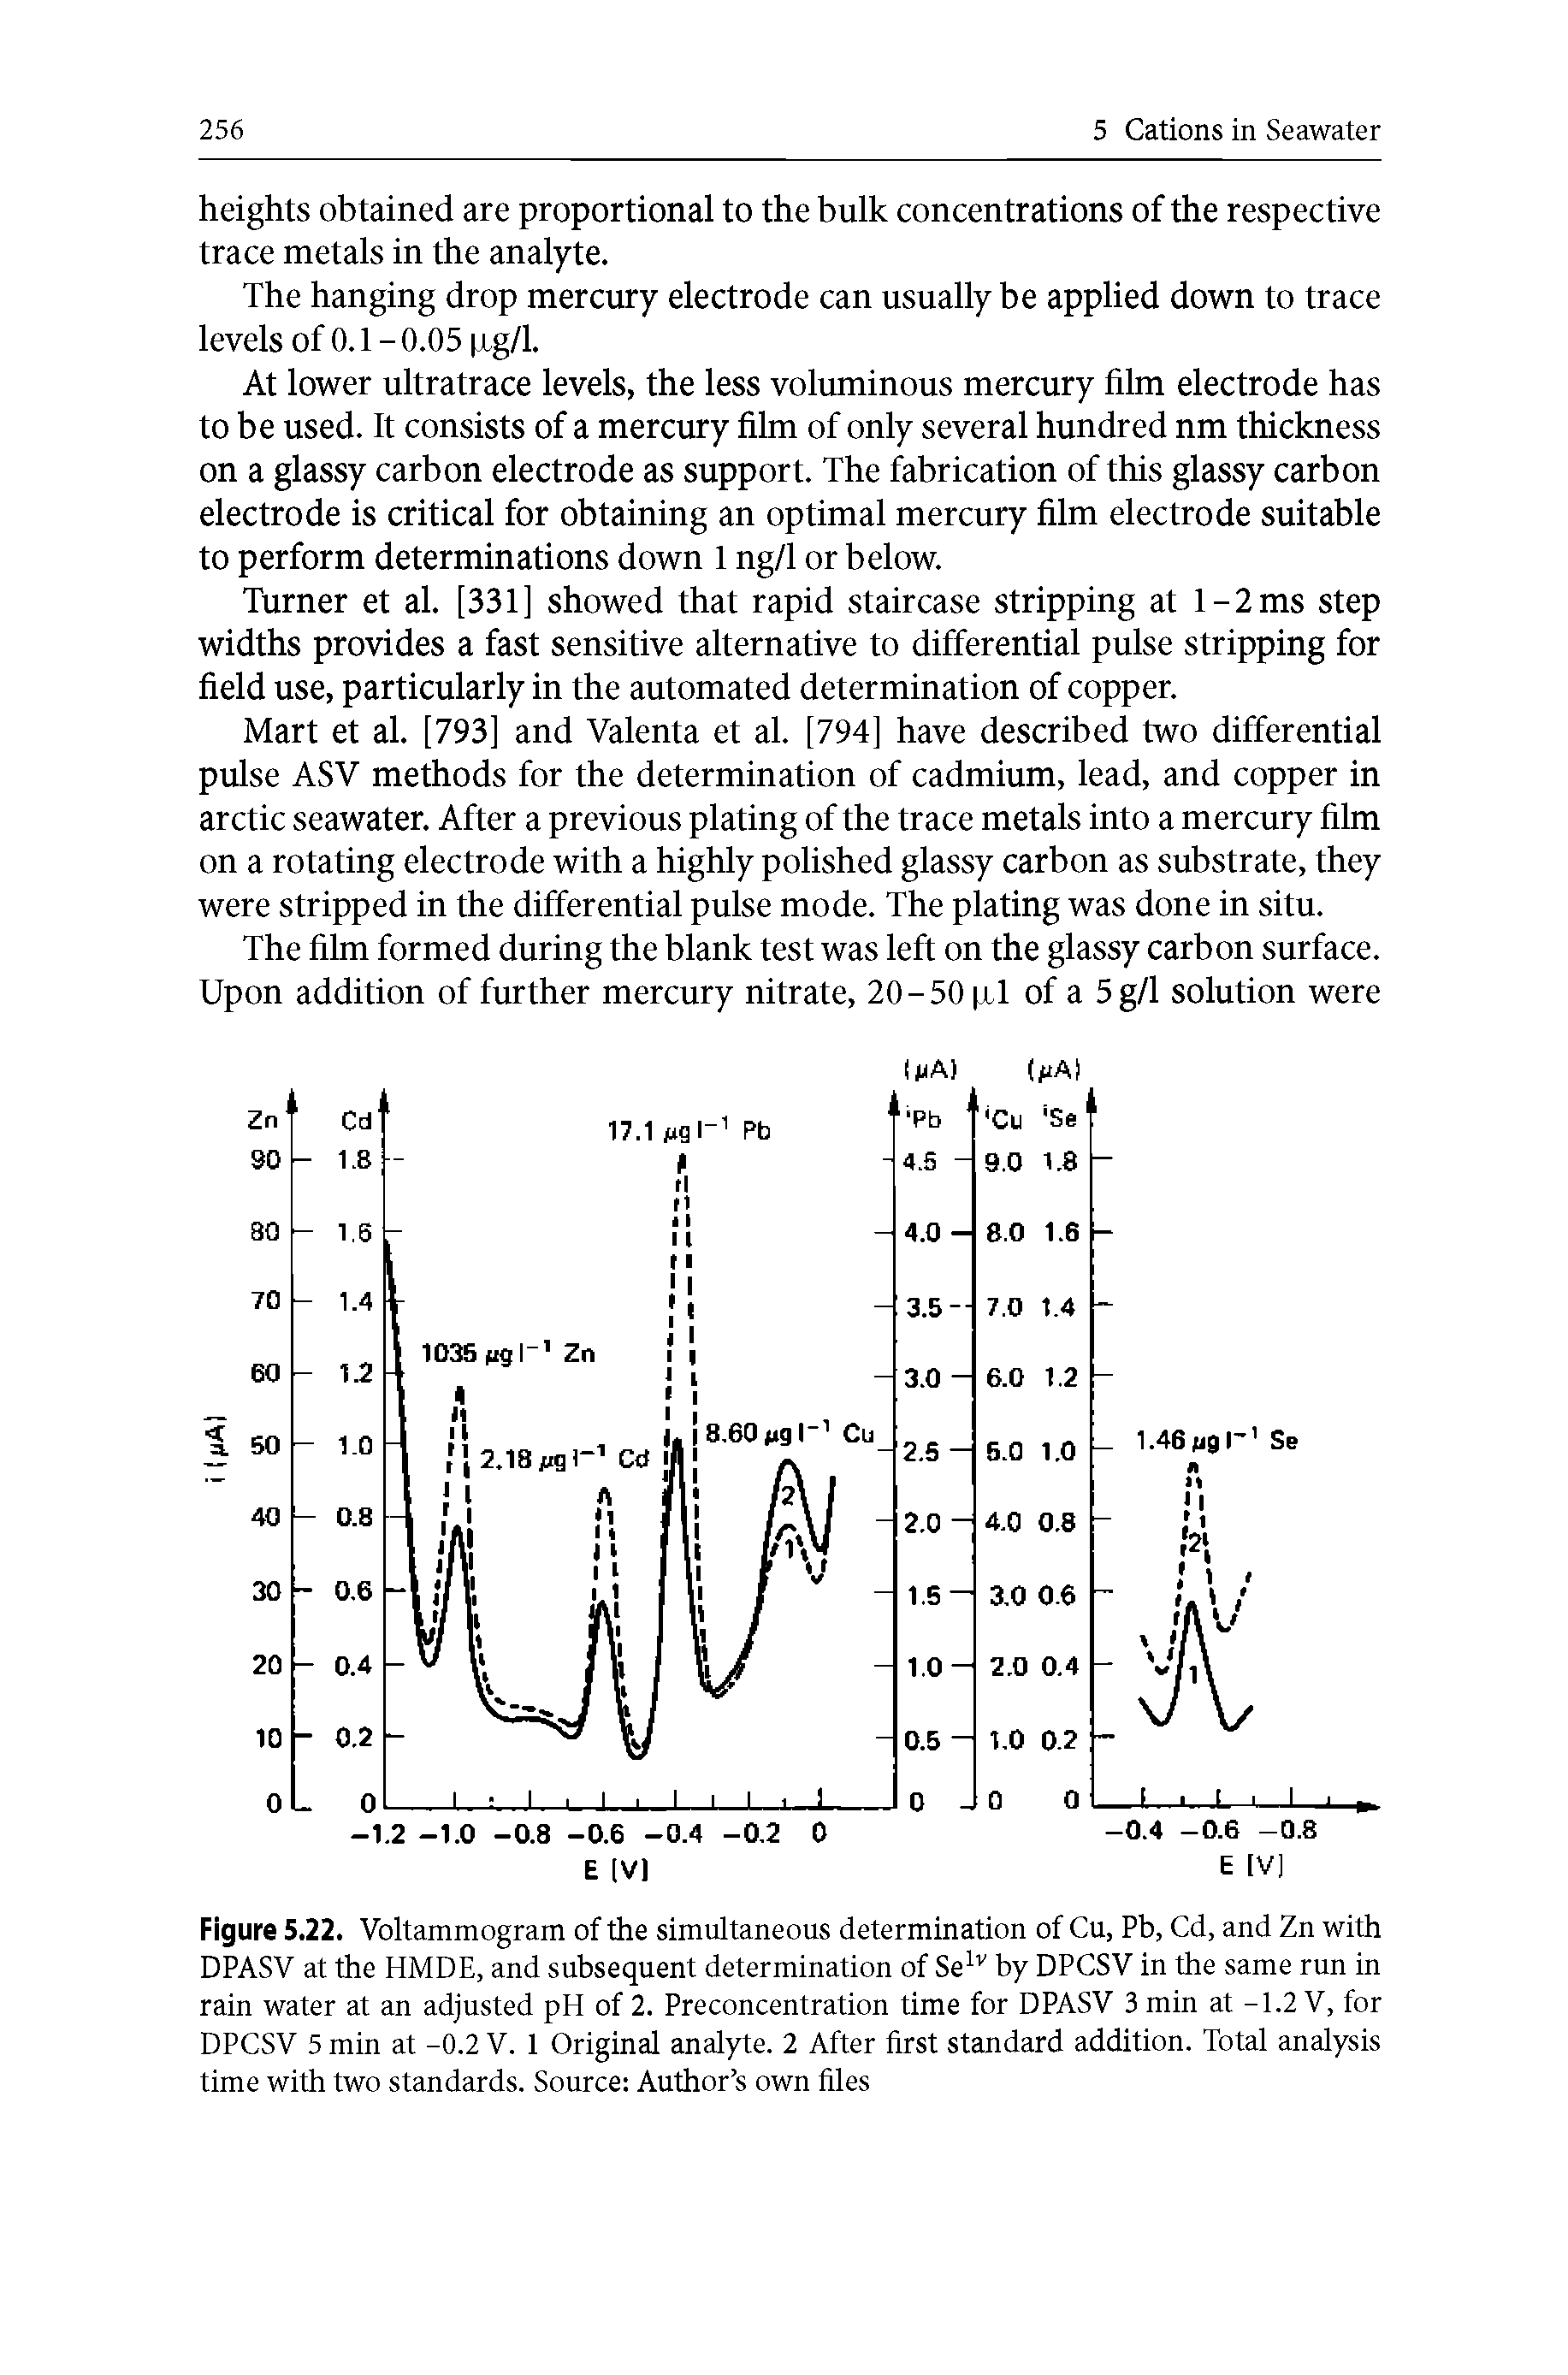 Figure 5.22. Voltammogram of the simultaneous determination of Cu, Pb, Cd, and Zn with DPASV at the HMDE, and subsequent determination of Selv by DPCSV in the same run in rain water at an adjusted pH of 2. Preconcentration time for DPASV 3 min at -1.2 V, for DPCSV 5 min at -0.2 V. 1 Original analyte. 2 After first standard addition. Total analysis time with two standards. Source Author s own files...